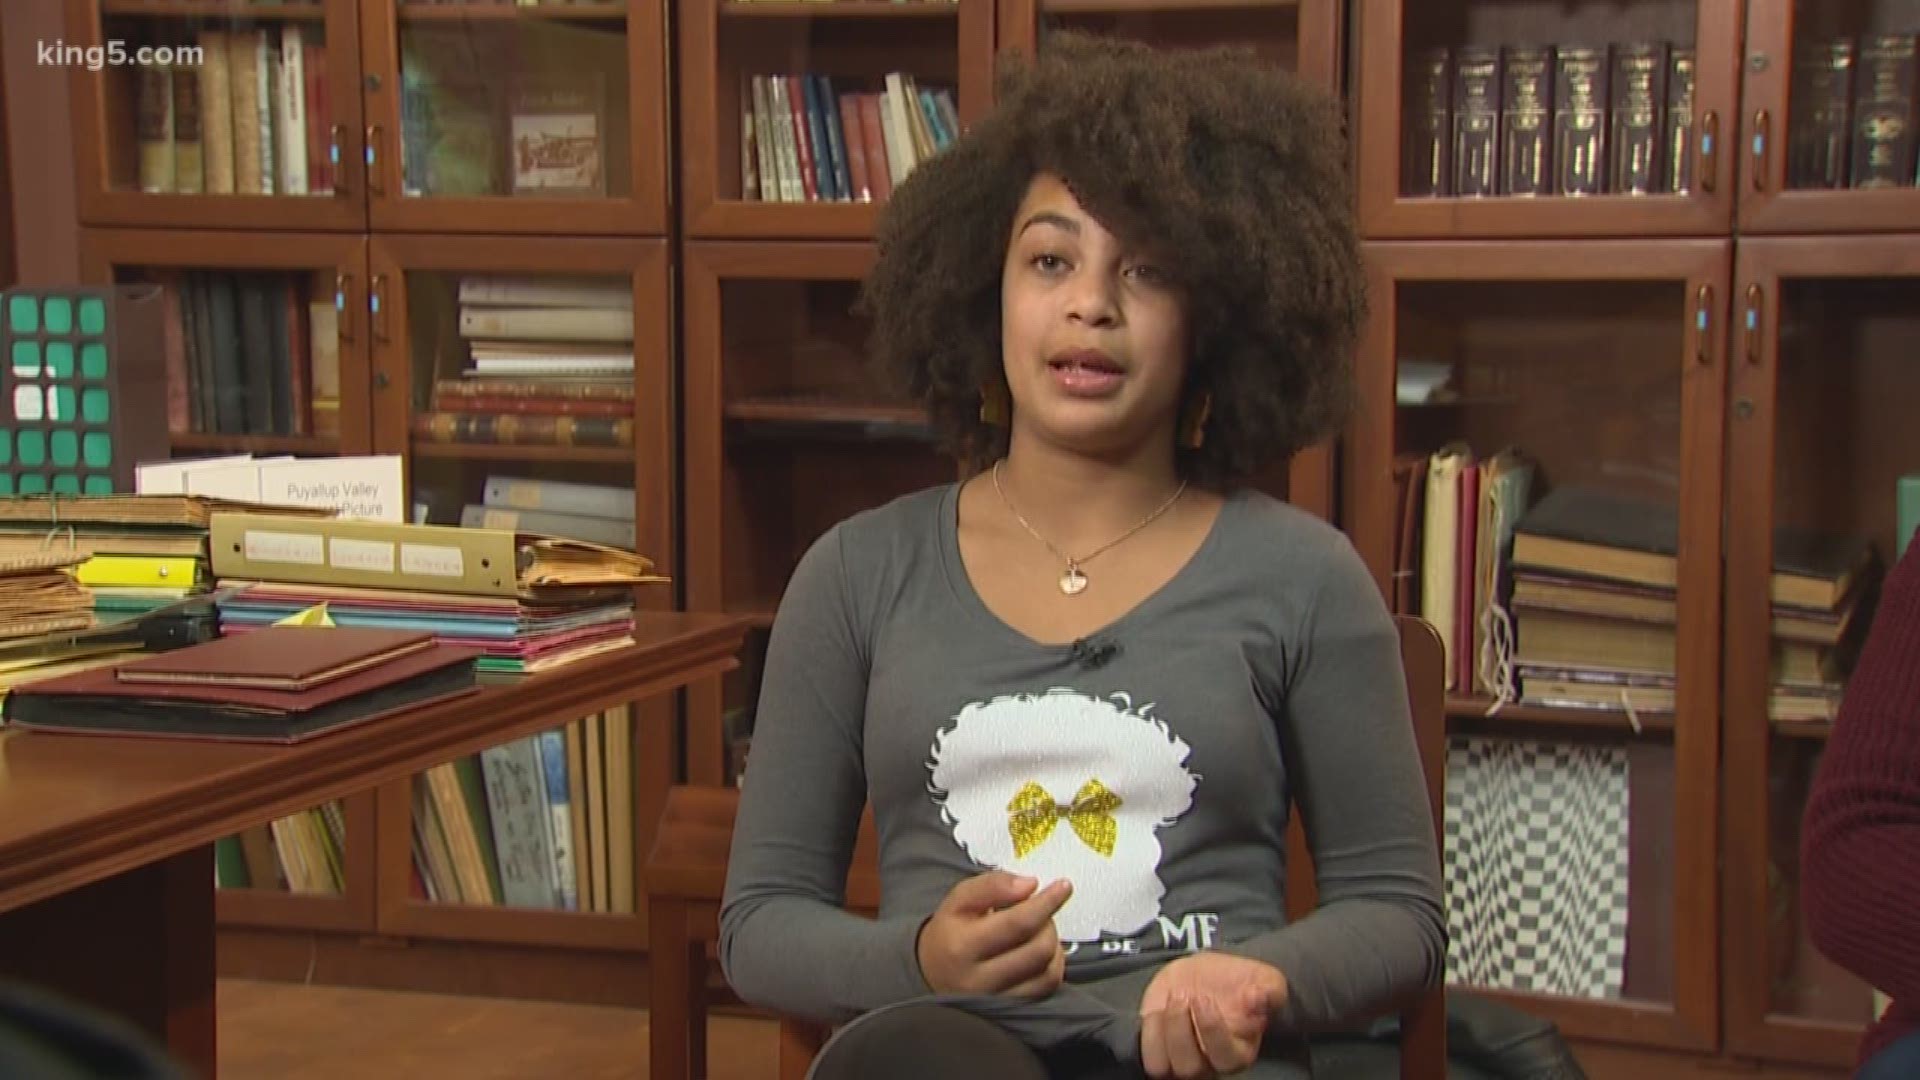 Her teacher said the student was being harassed all day for wearing her natural hair.